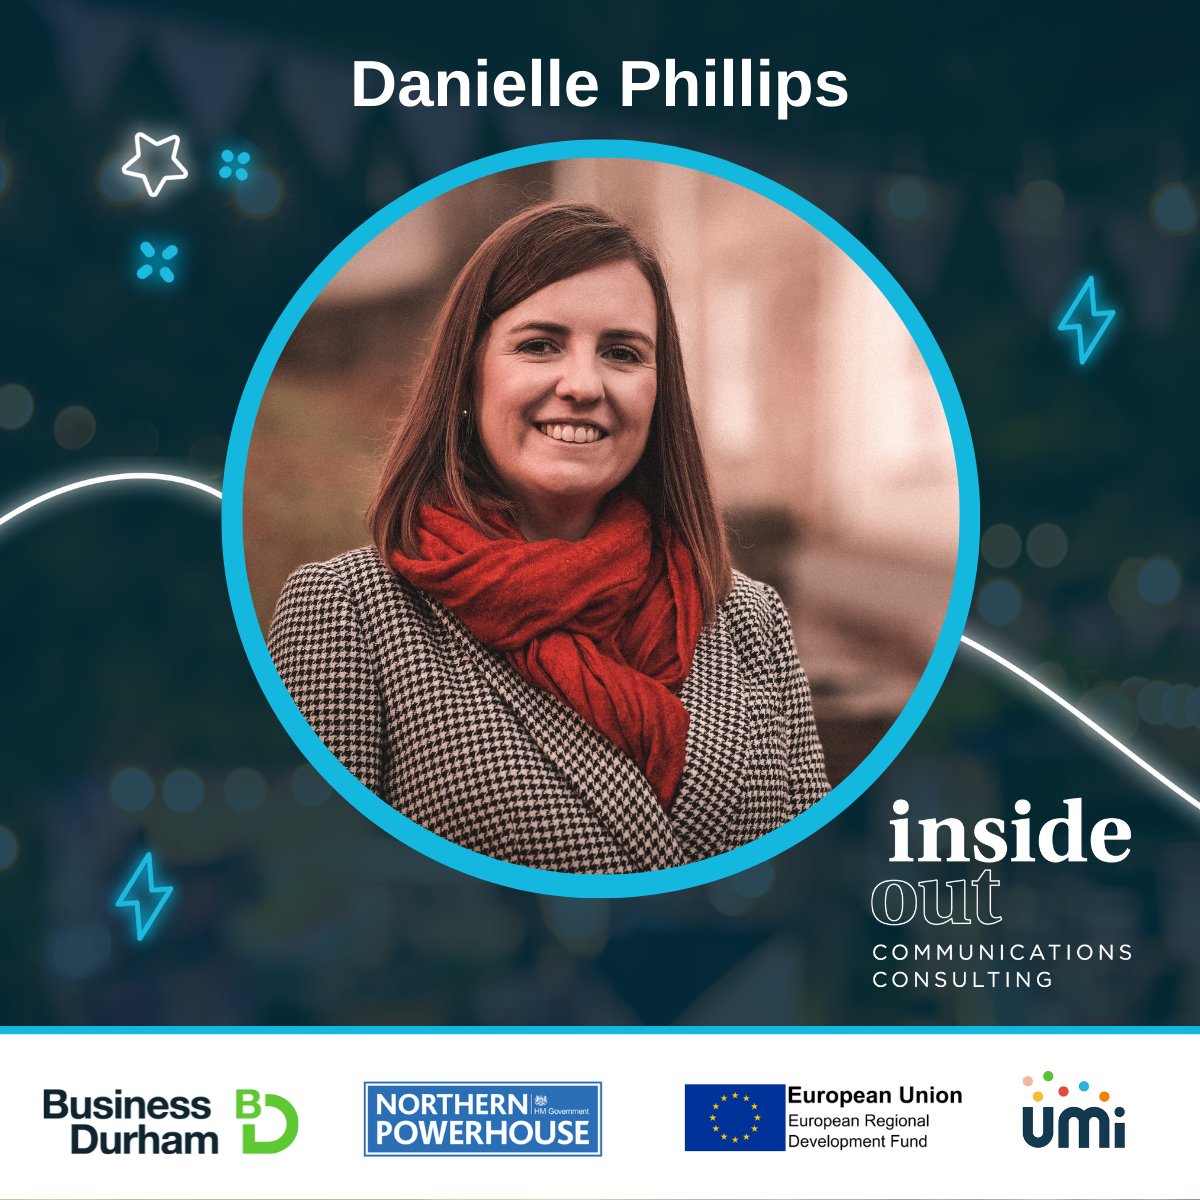 Fancy creating new opportunities, growing your peer network, and bettering your brand? Then join @dp_insideout for an inspiring day of networking and business support at the @DurhamStarts #DABSFestival22. 📍 Radisson Blu, Durham 📅 13 October Sign up ➡️ bit.ly/3DXhFmv